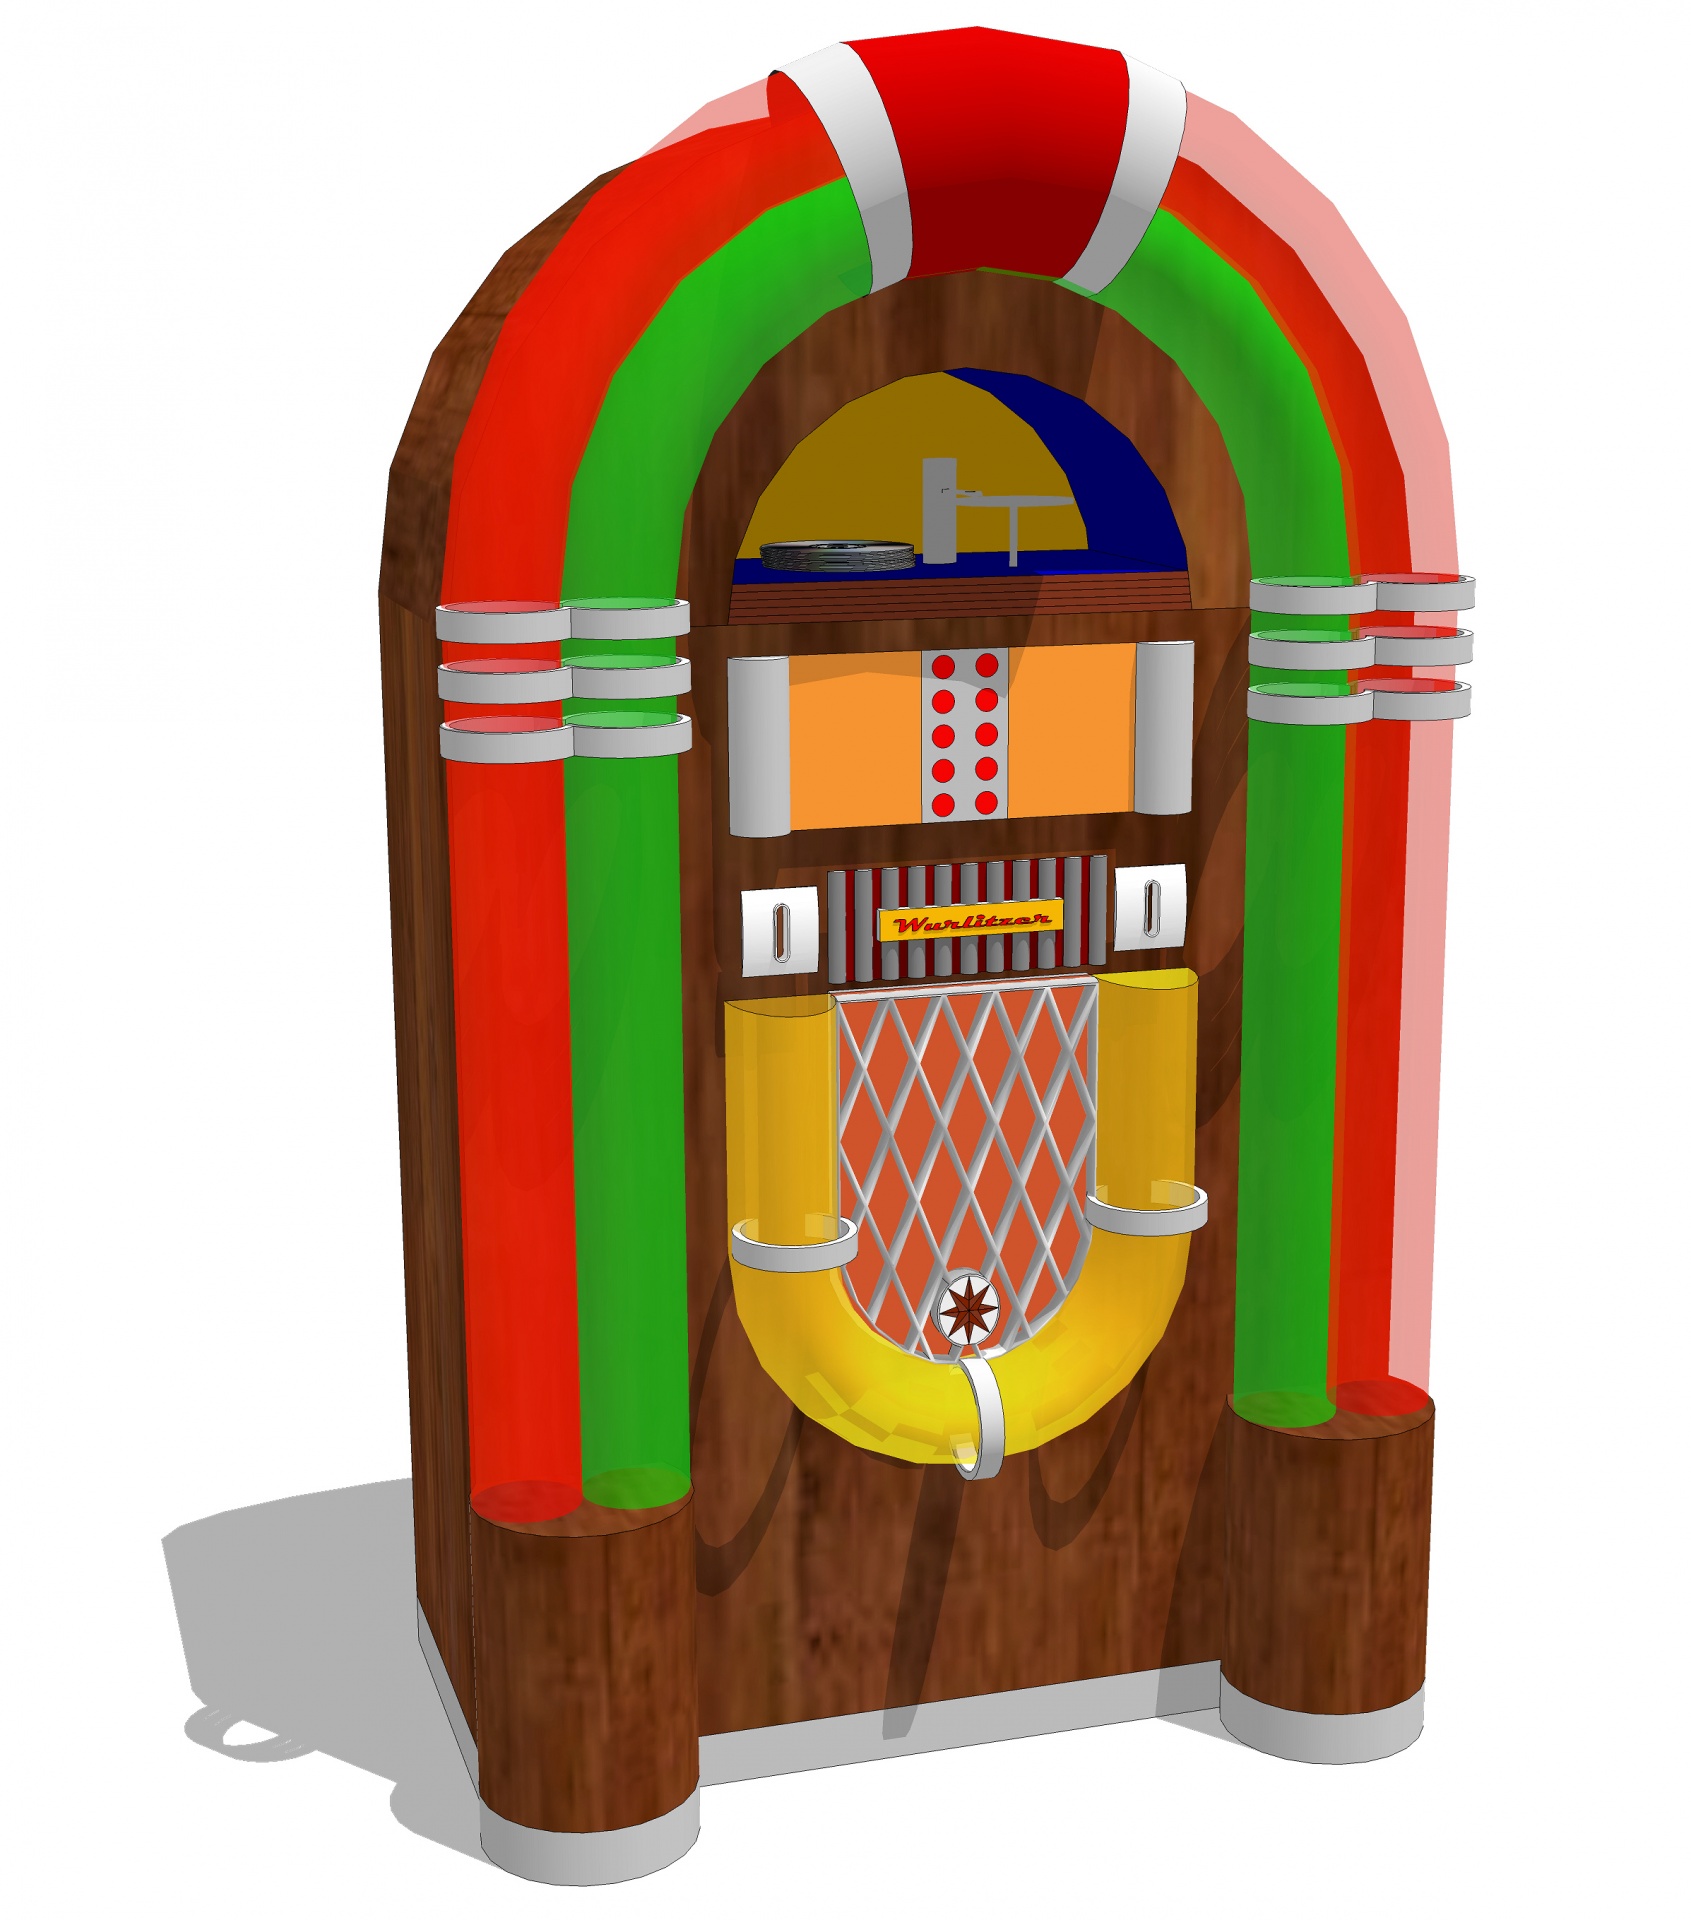 How To Draw A Jukebox Step By Step Today im going to teach you how to